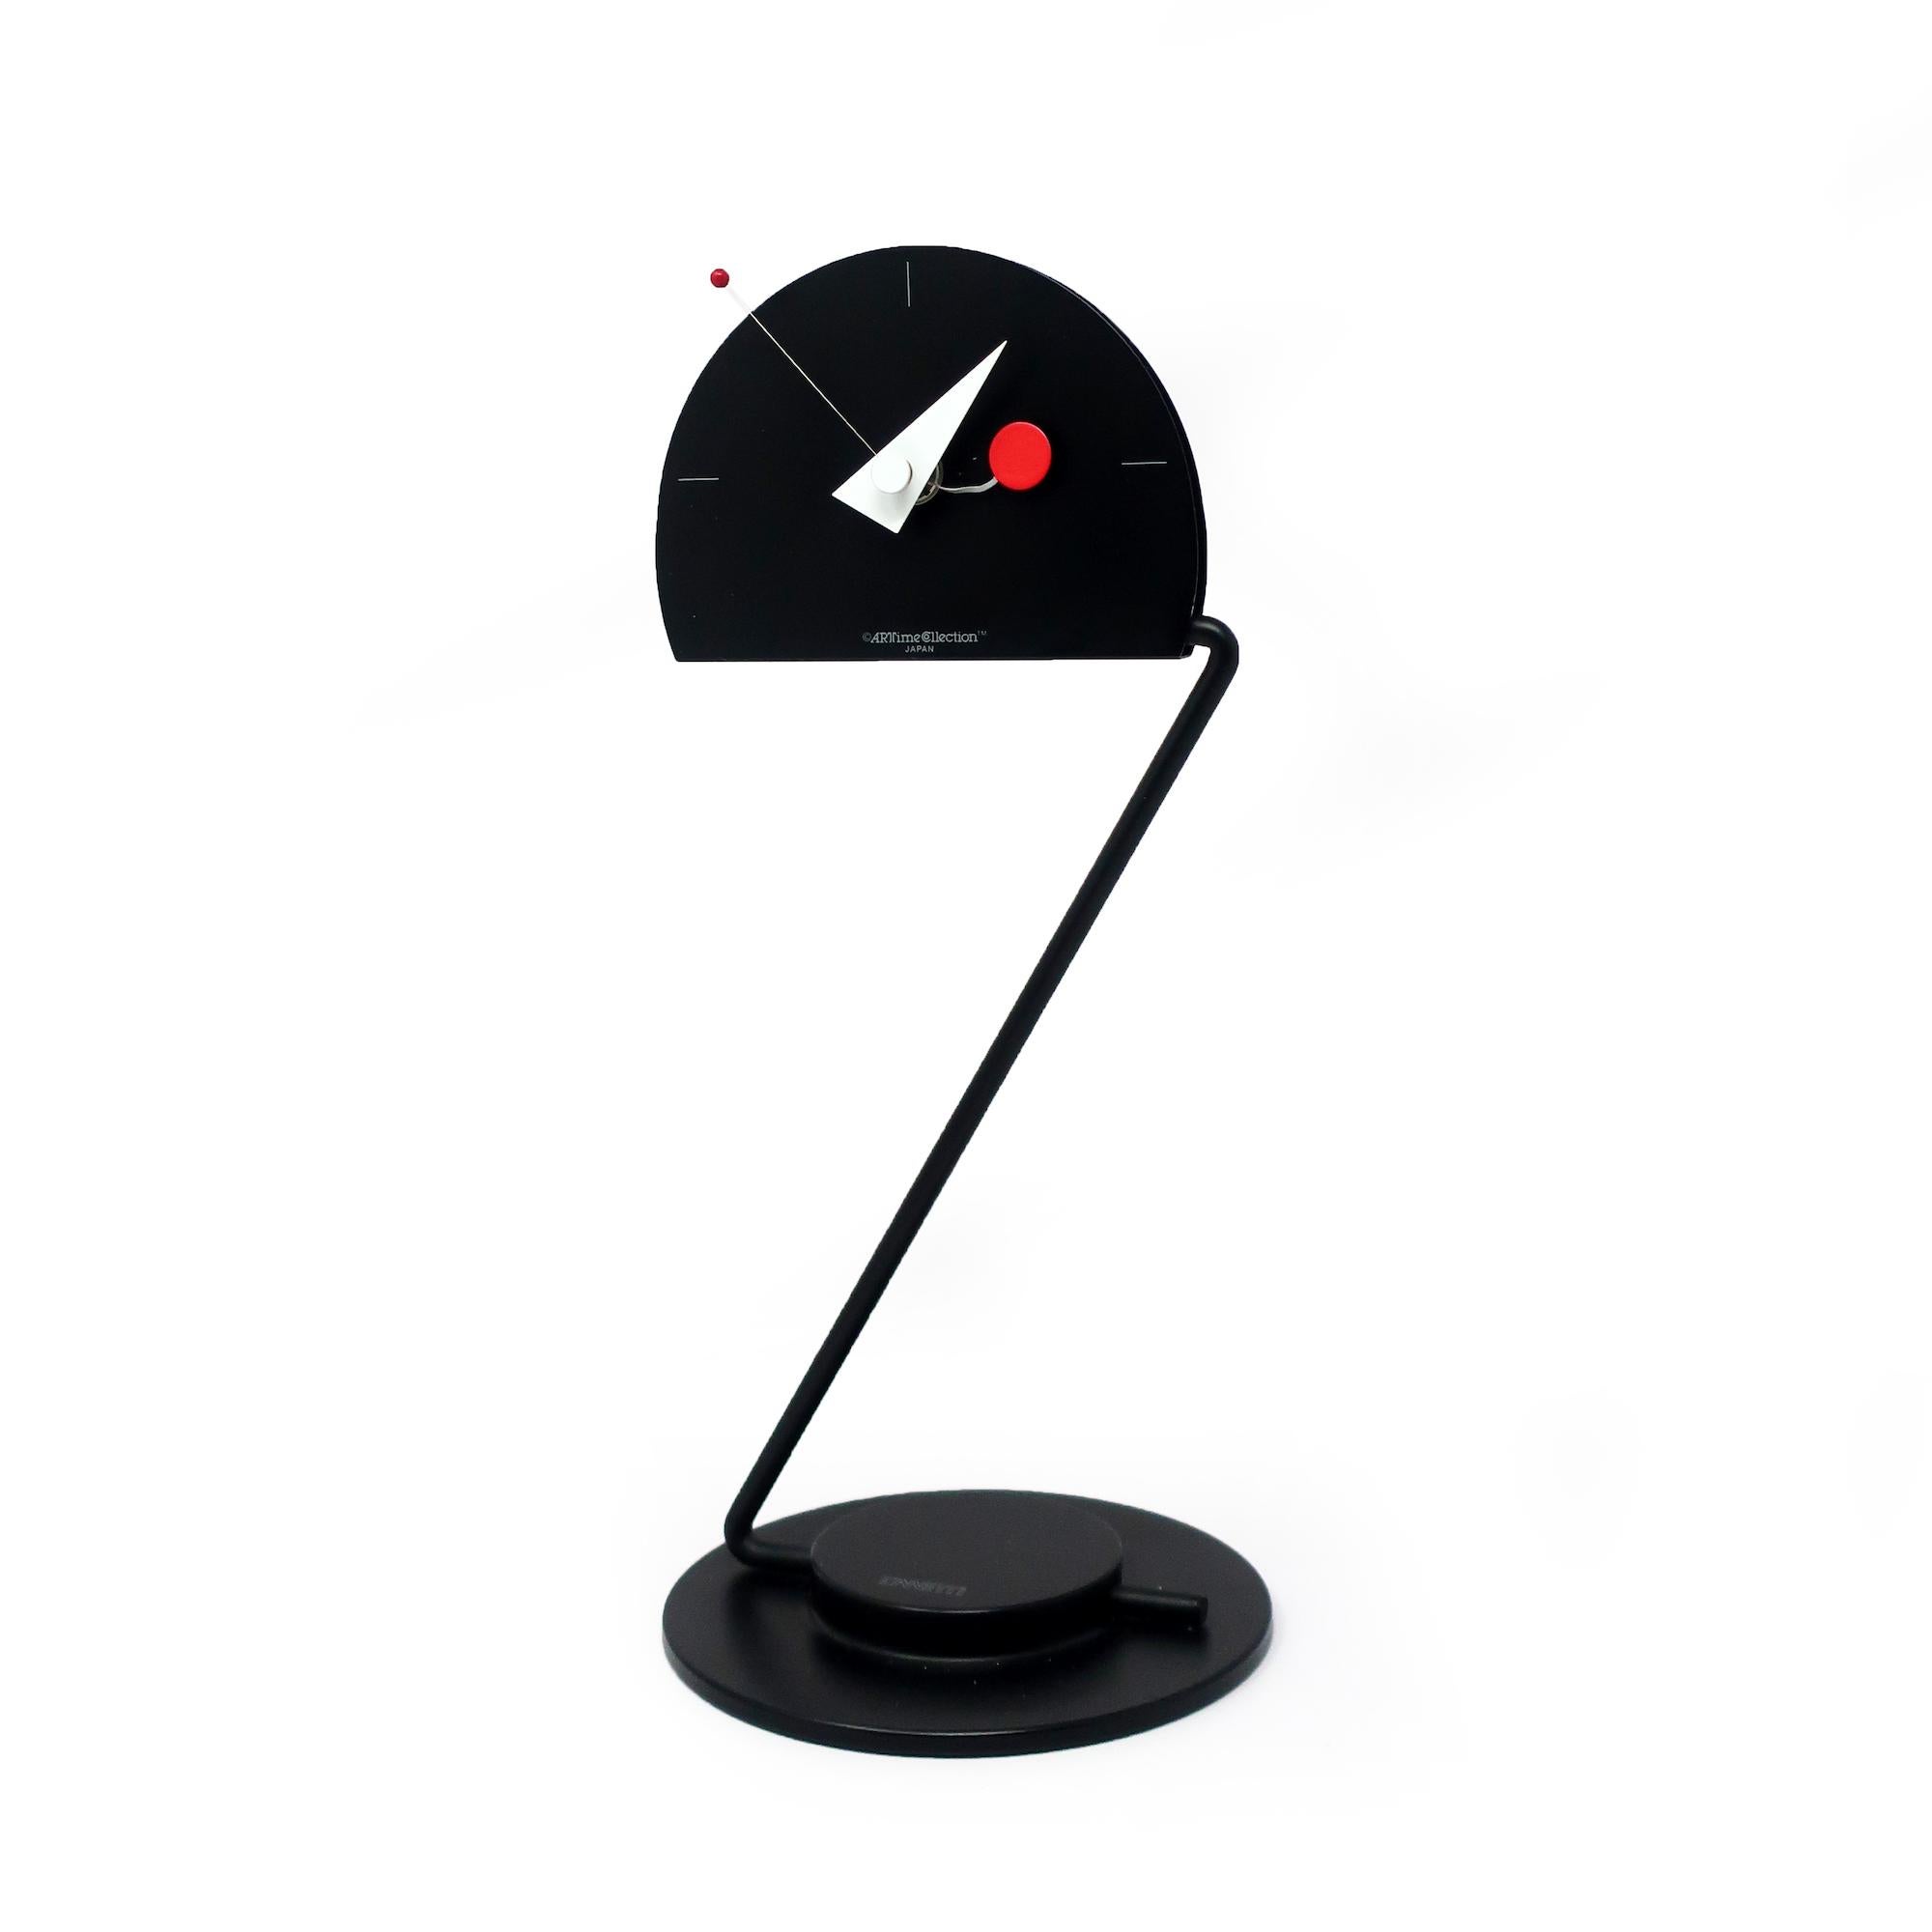 With a round black metal base, articulating black metal stem, semicircle face and geomantic hands, this amazing Artime Collection desk clock by Canetti has all of the elements of great 1980s postmodern design: primary colors, simple lines, wacky